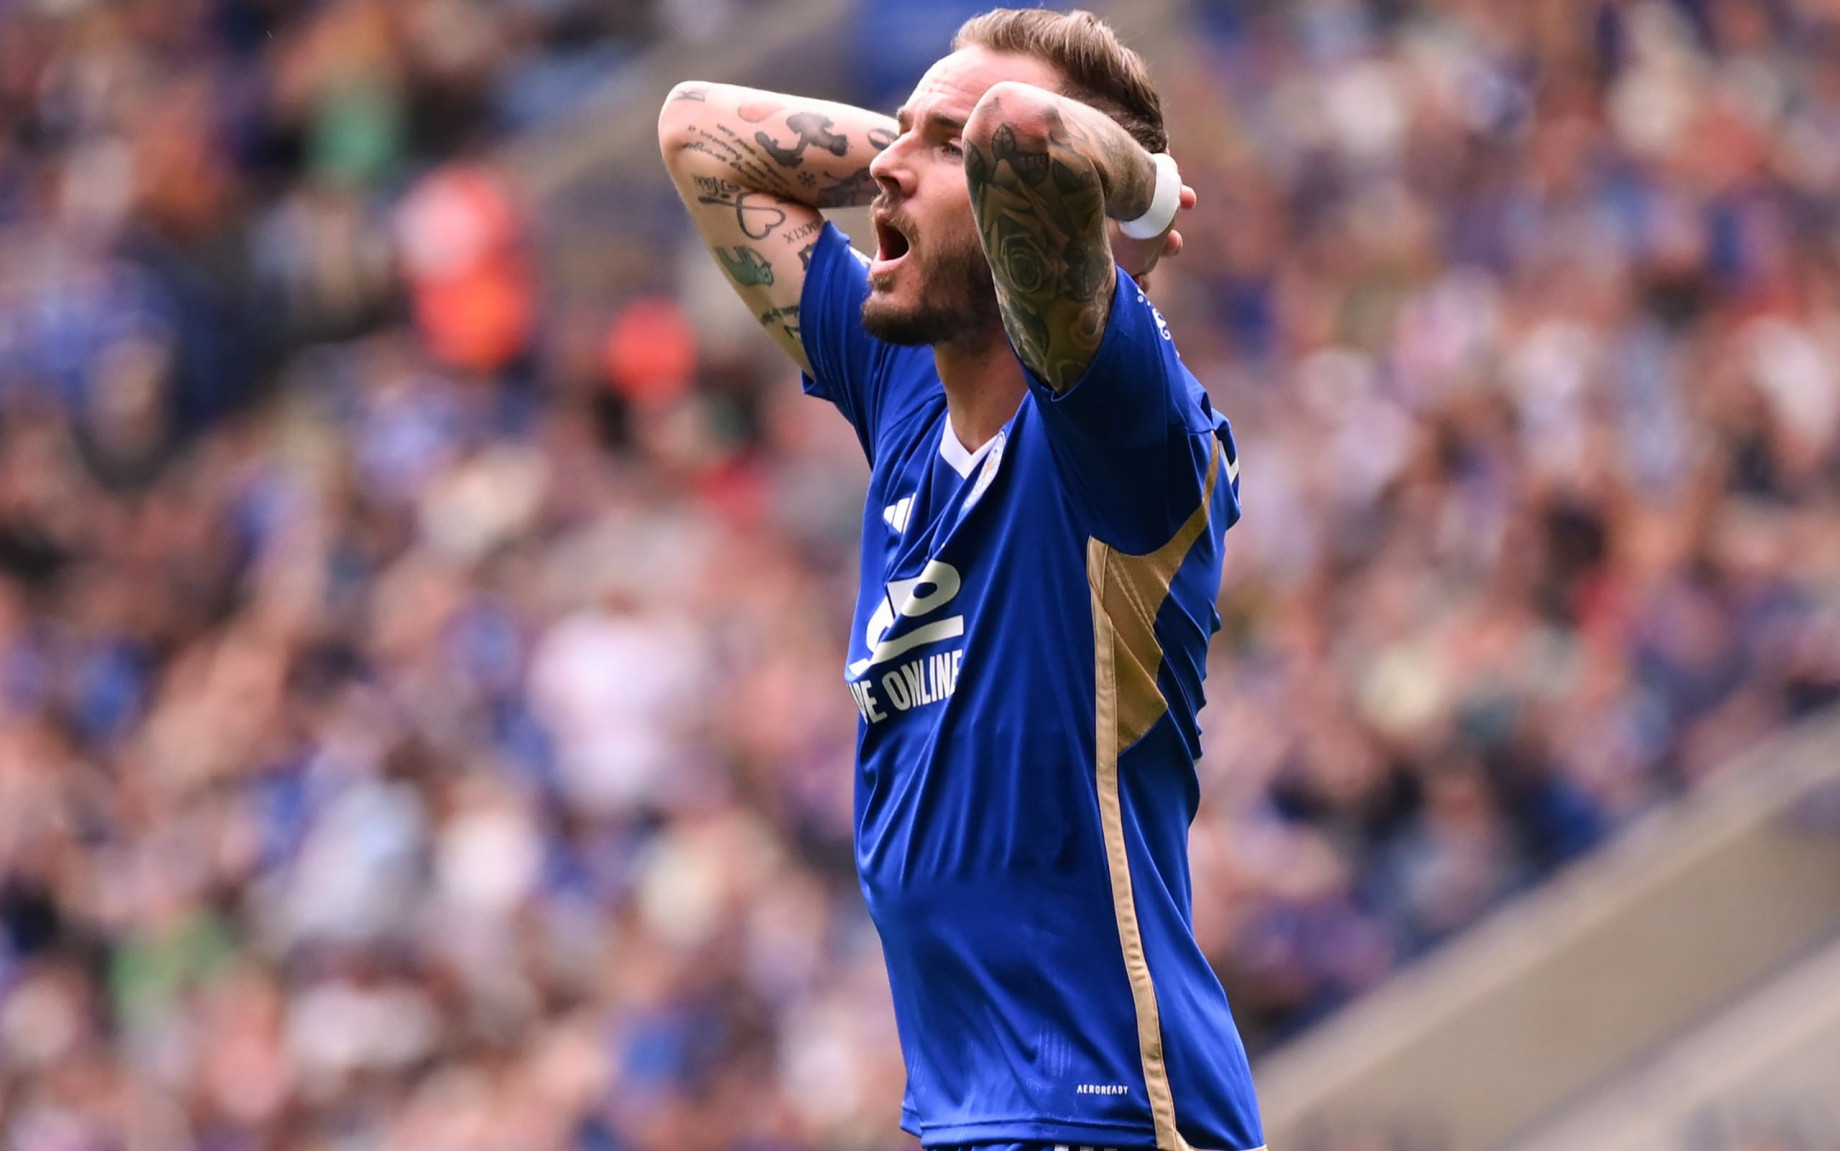 maddison-leicester-getty-gpo-min.jpg